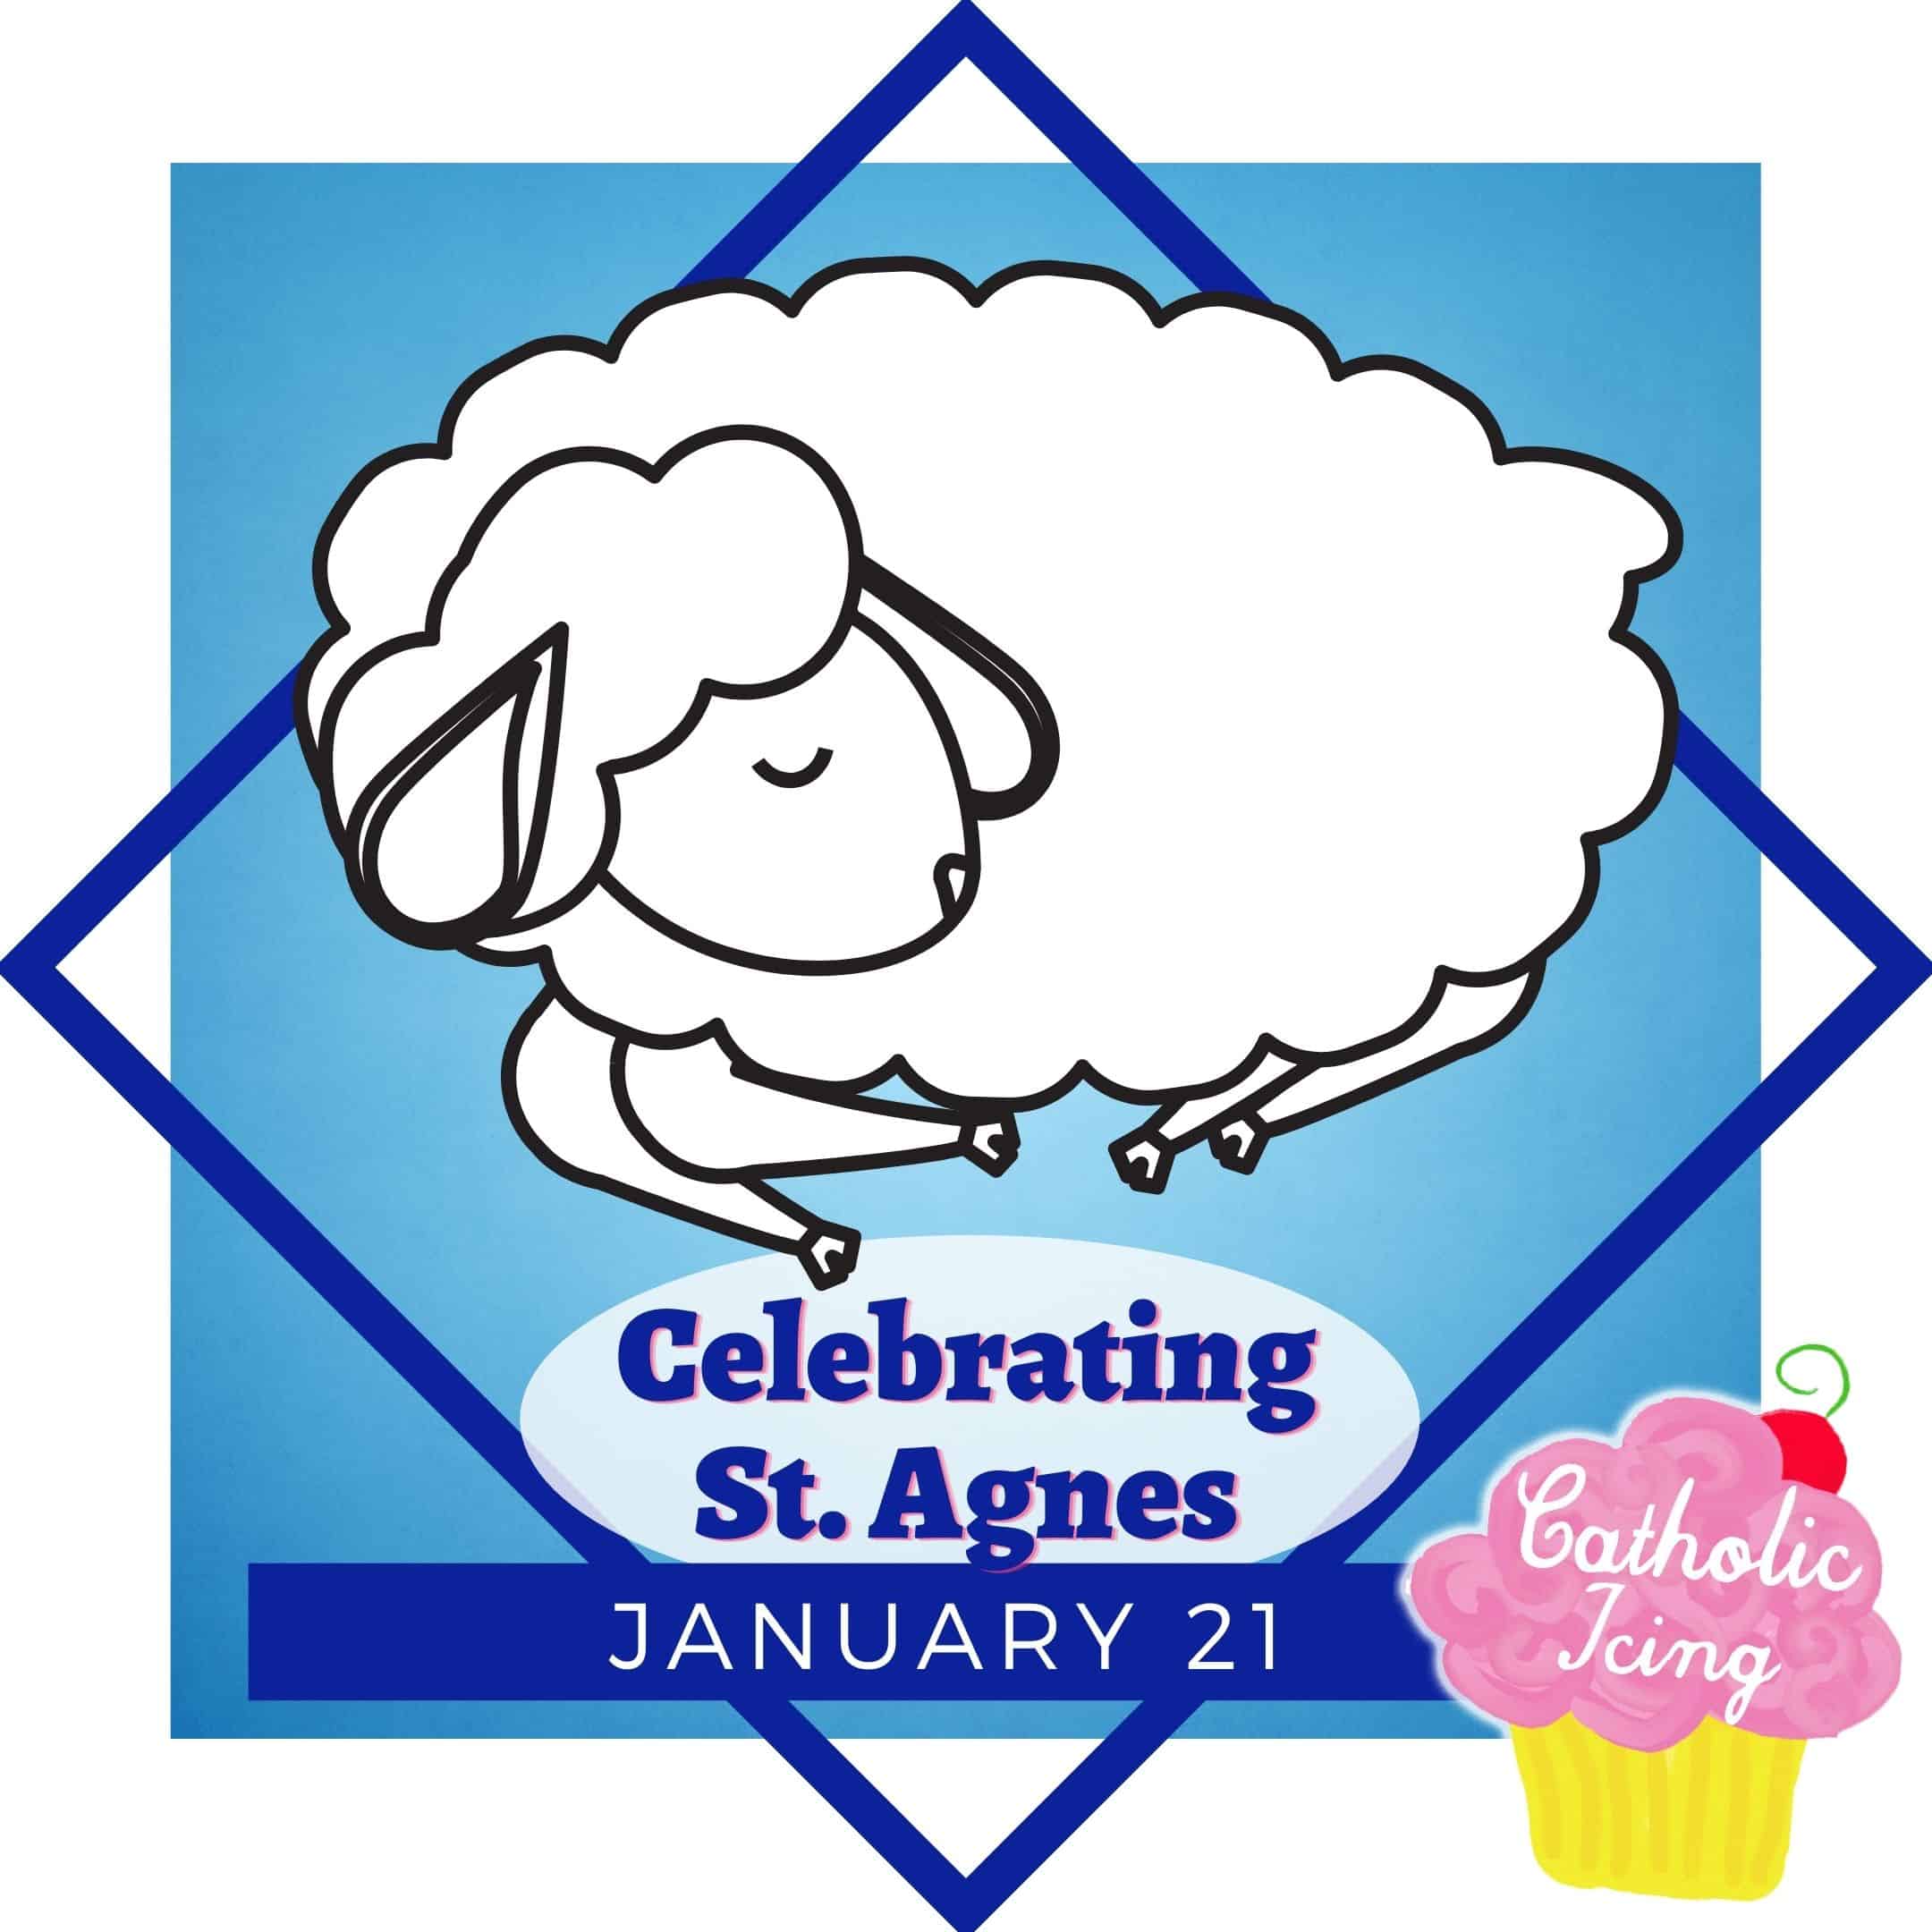 Celebrating the feast day of st agnes with kids